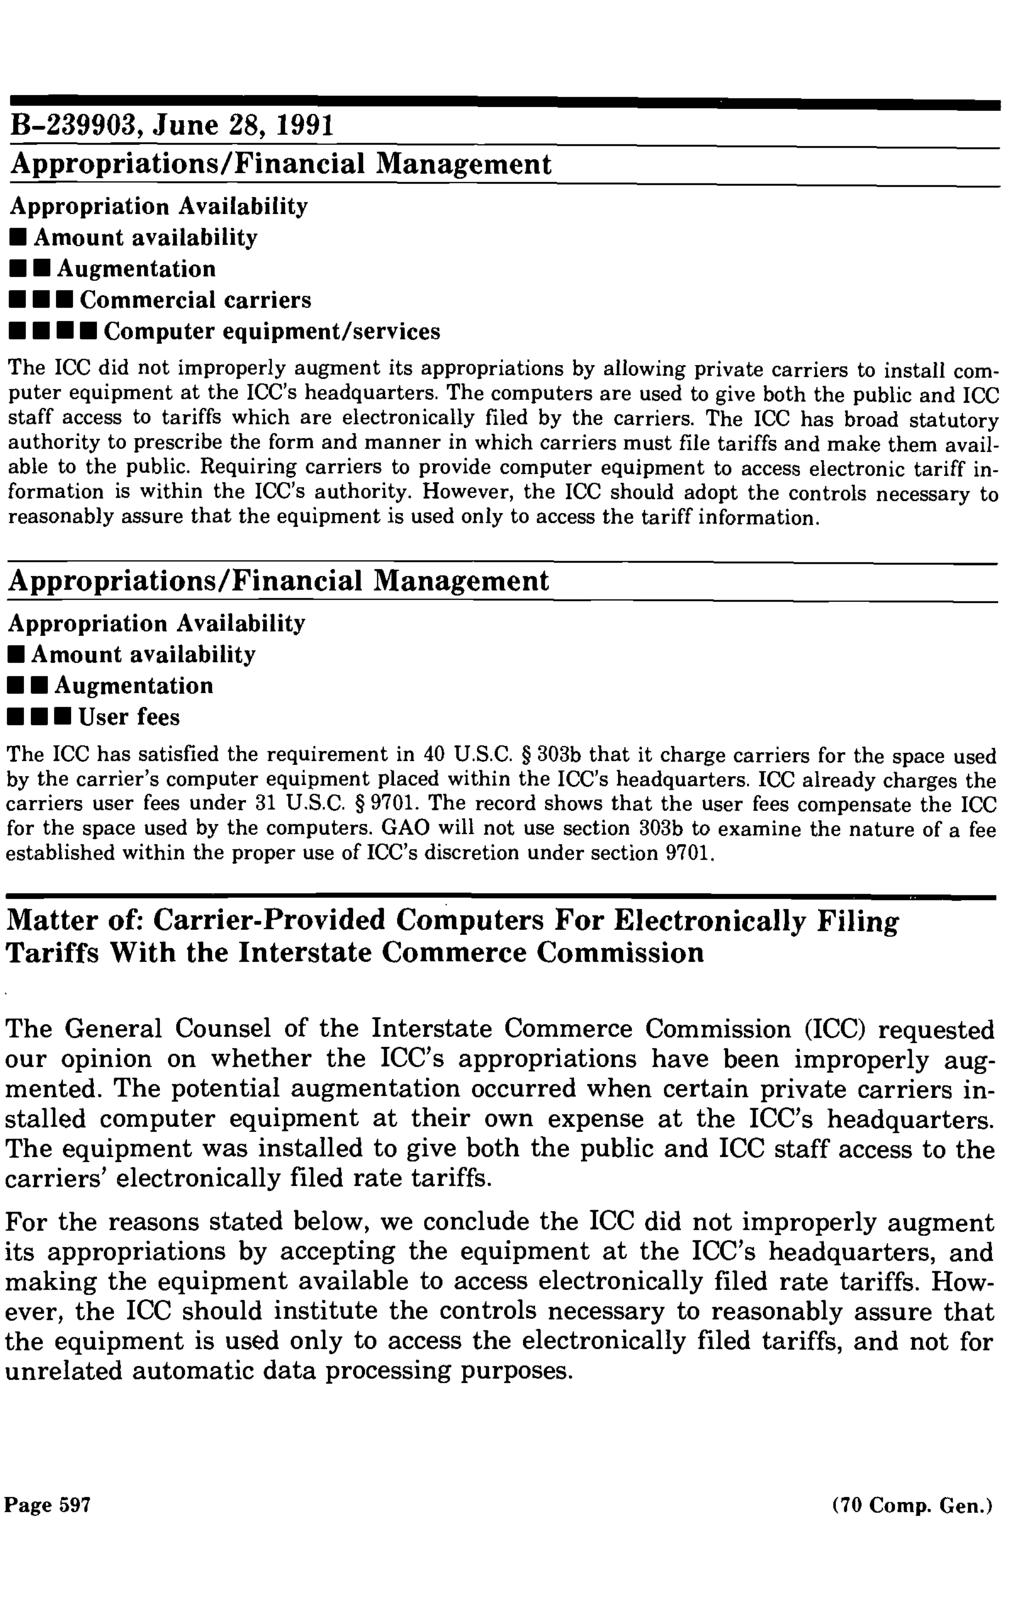 B 239903, June 28, 1991 Appropriations/Financial Management Appropriation Availability Amount availability U Augmentation U U Commercial carriers U UU Computer equipment/services The ICC did not